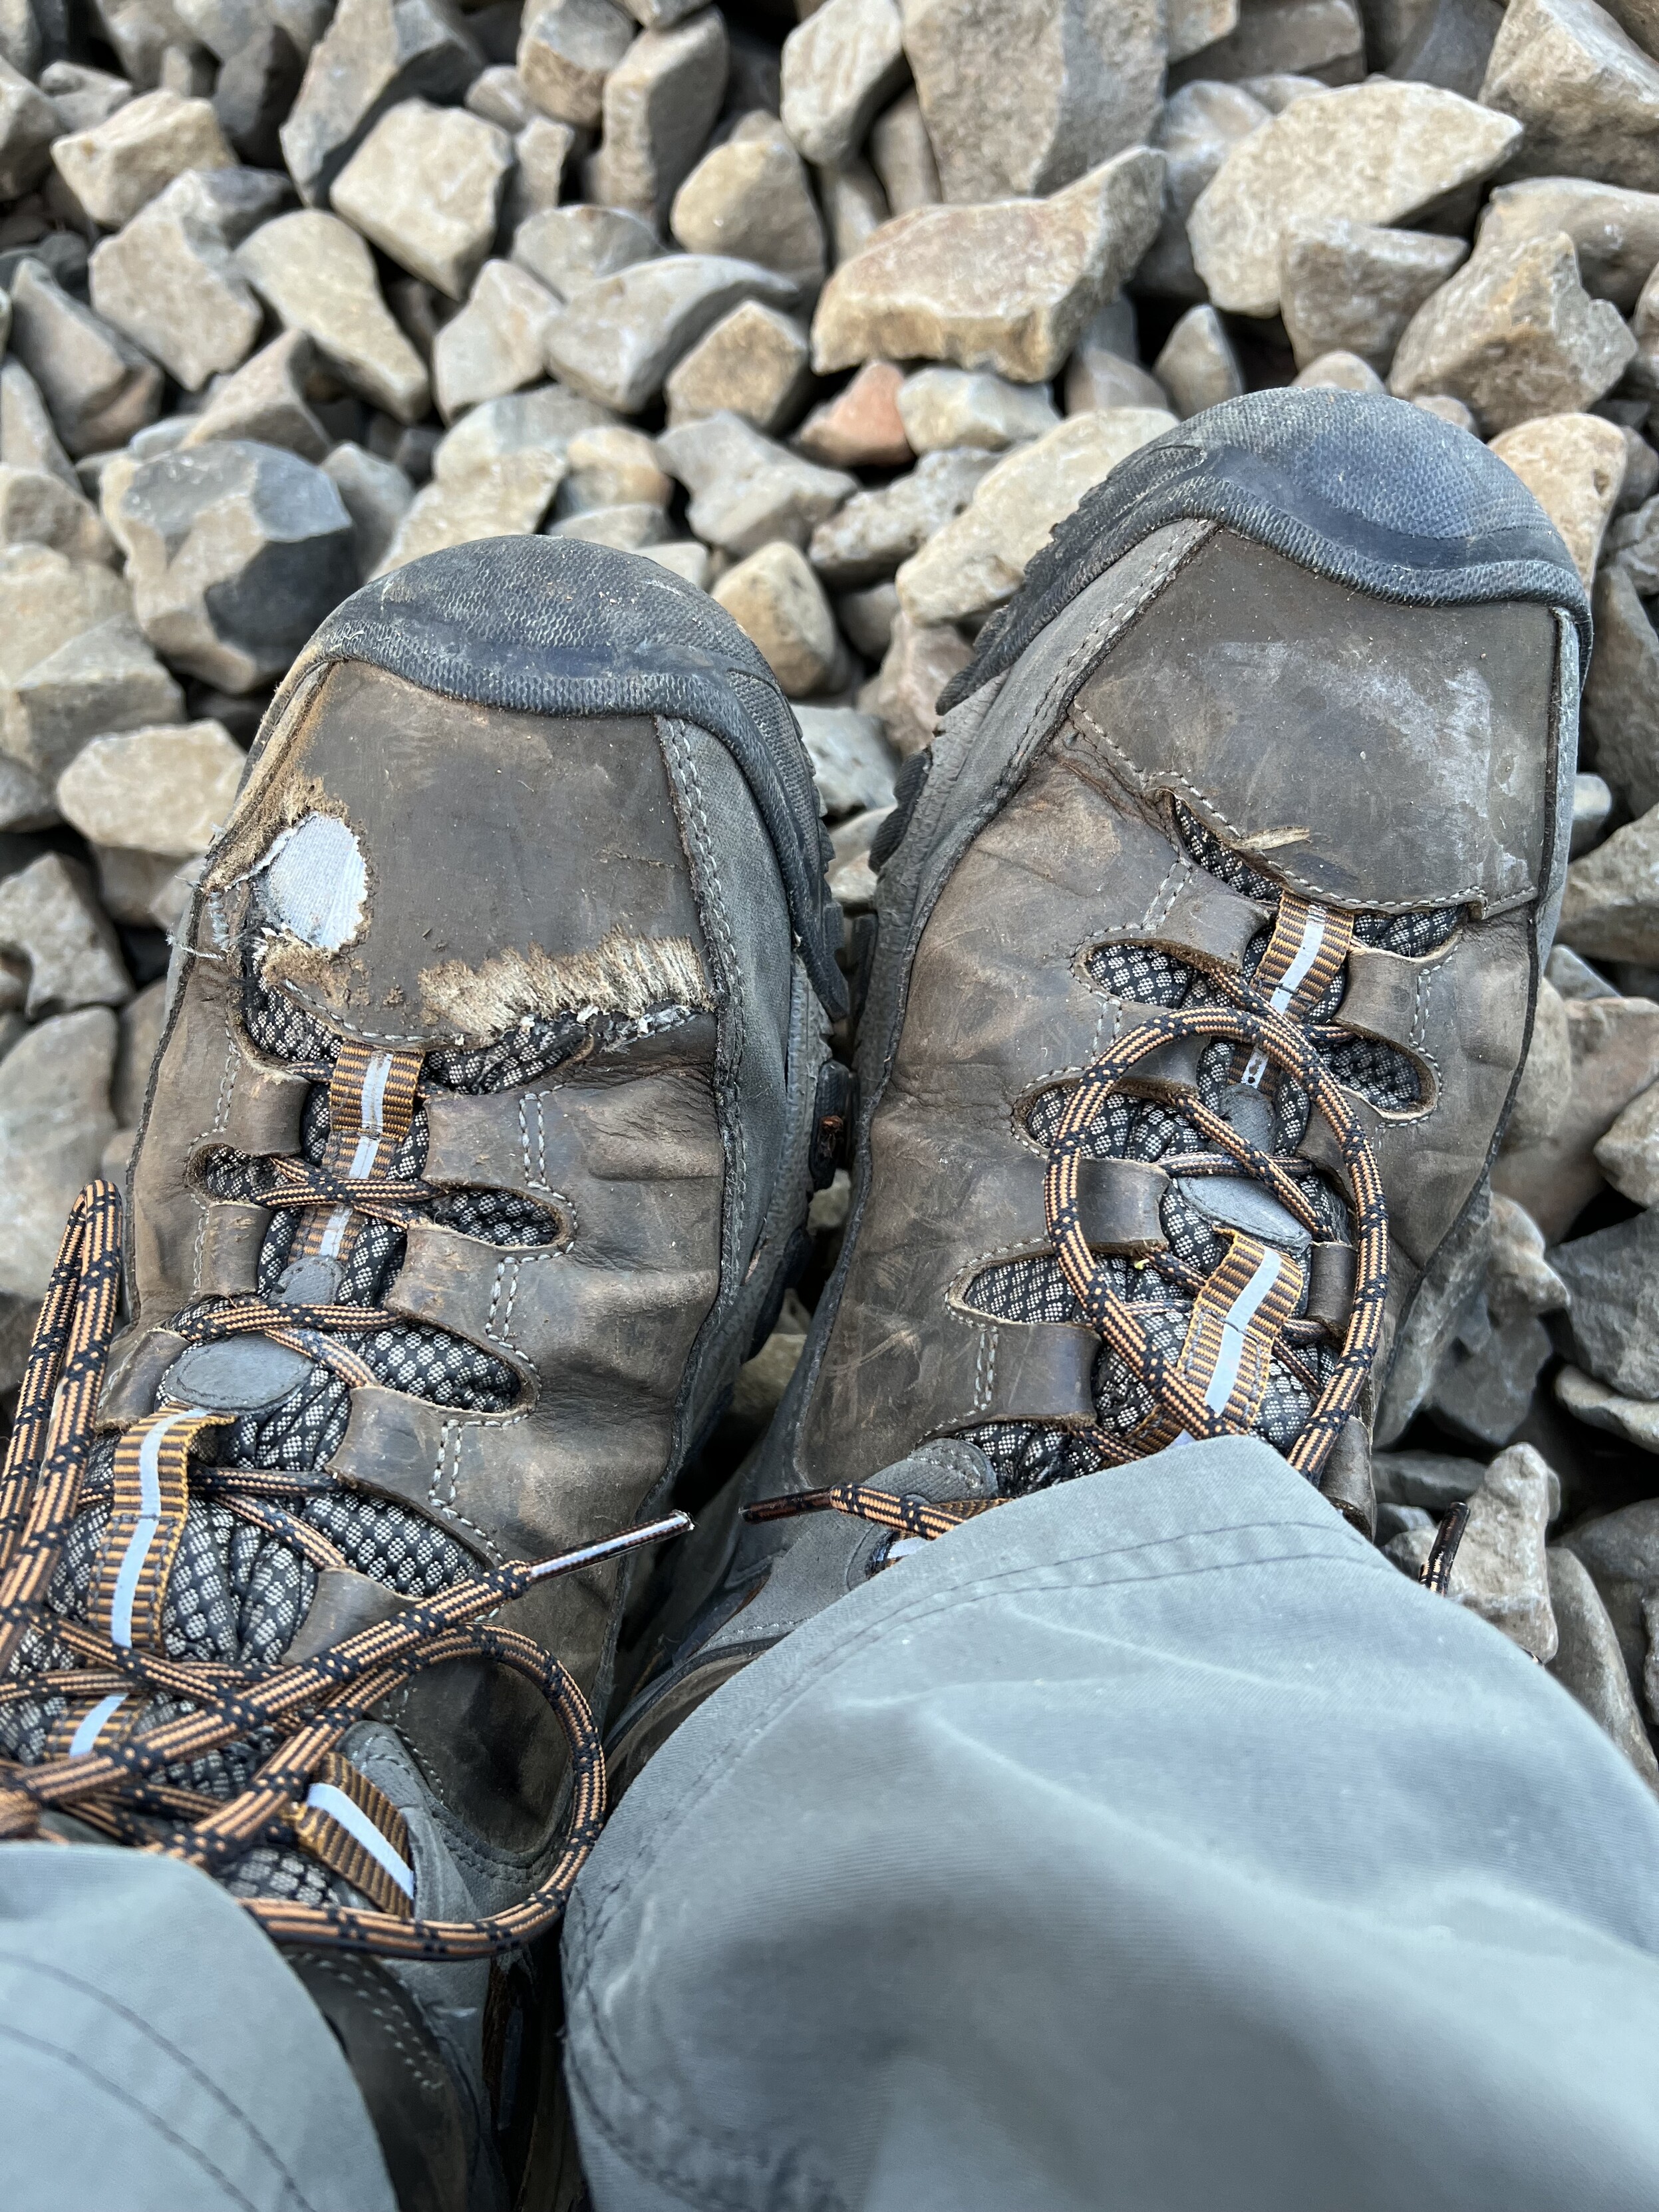 Keen boots with a hole in the leader that some critter chewed. 